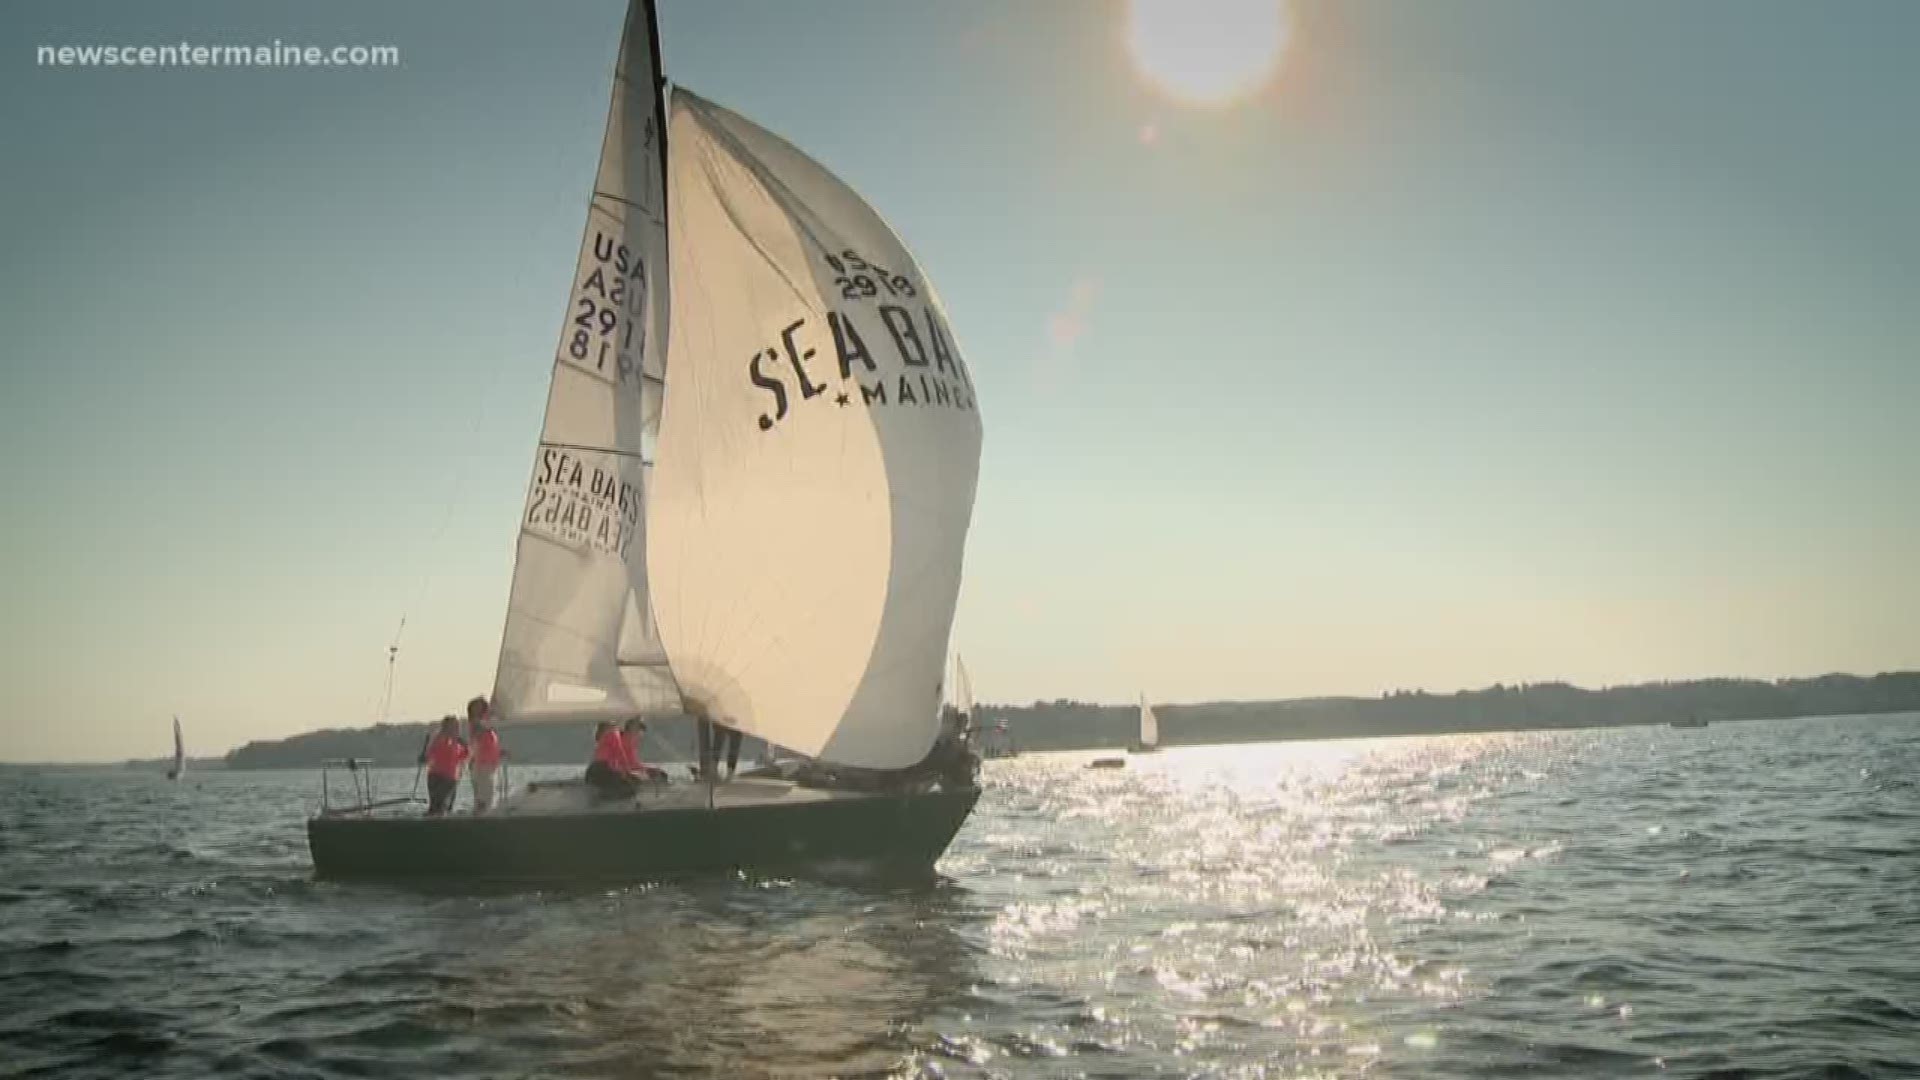 An all-women sailing team, sponsored by local company Sea Bags, is getting ready for nationals.